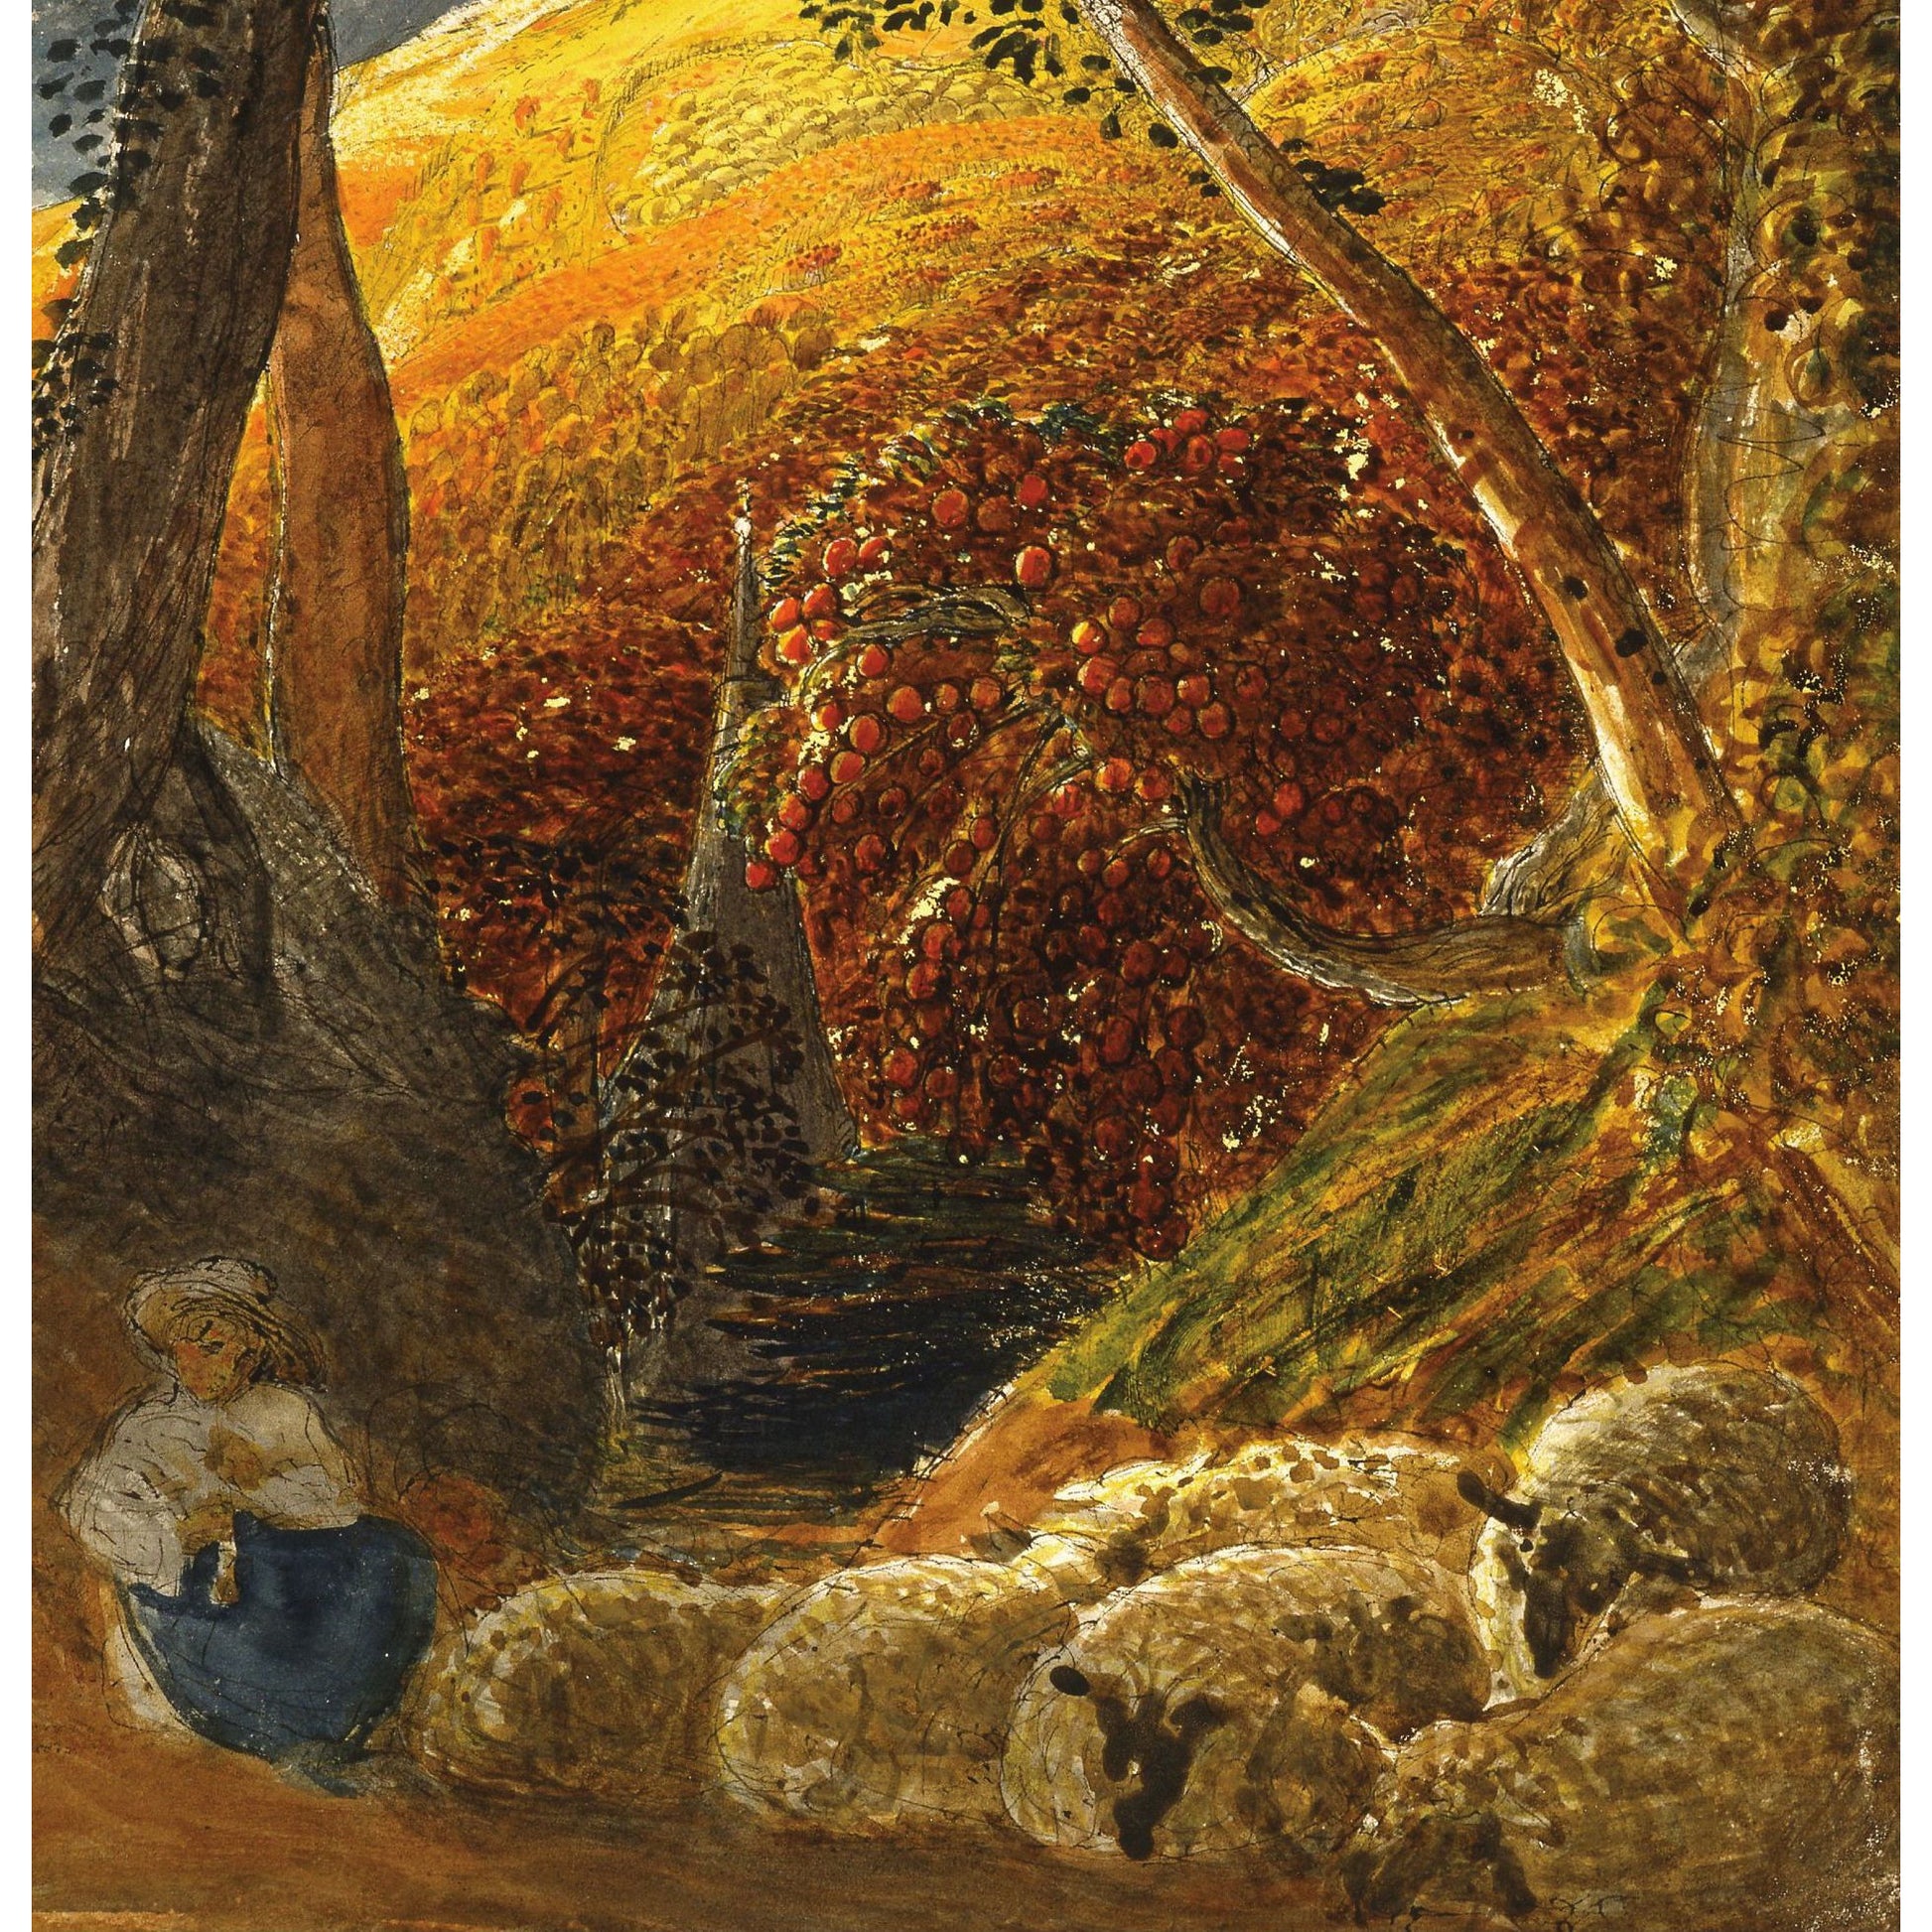 Greeting card - The Magic Apple Tree by Samuel Palmer. From the collection of The Fitzwilliam Museum, brought to you by Curating Cambridge.com